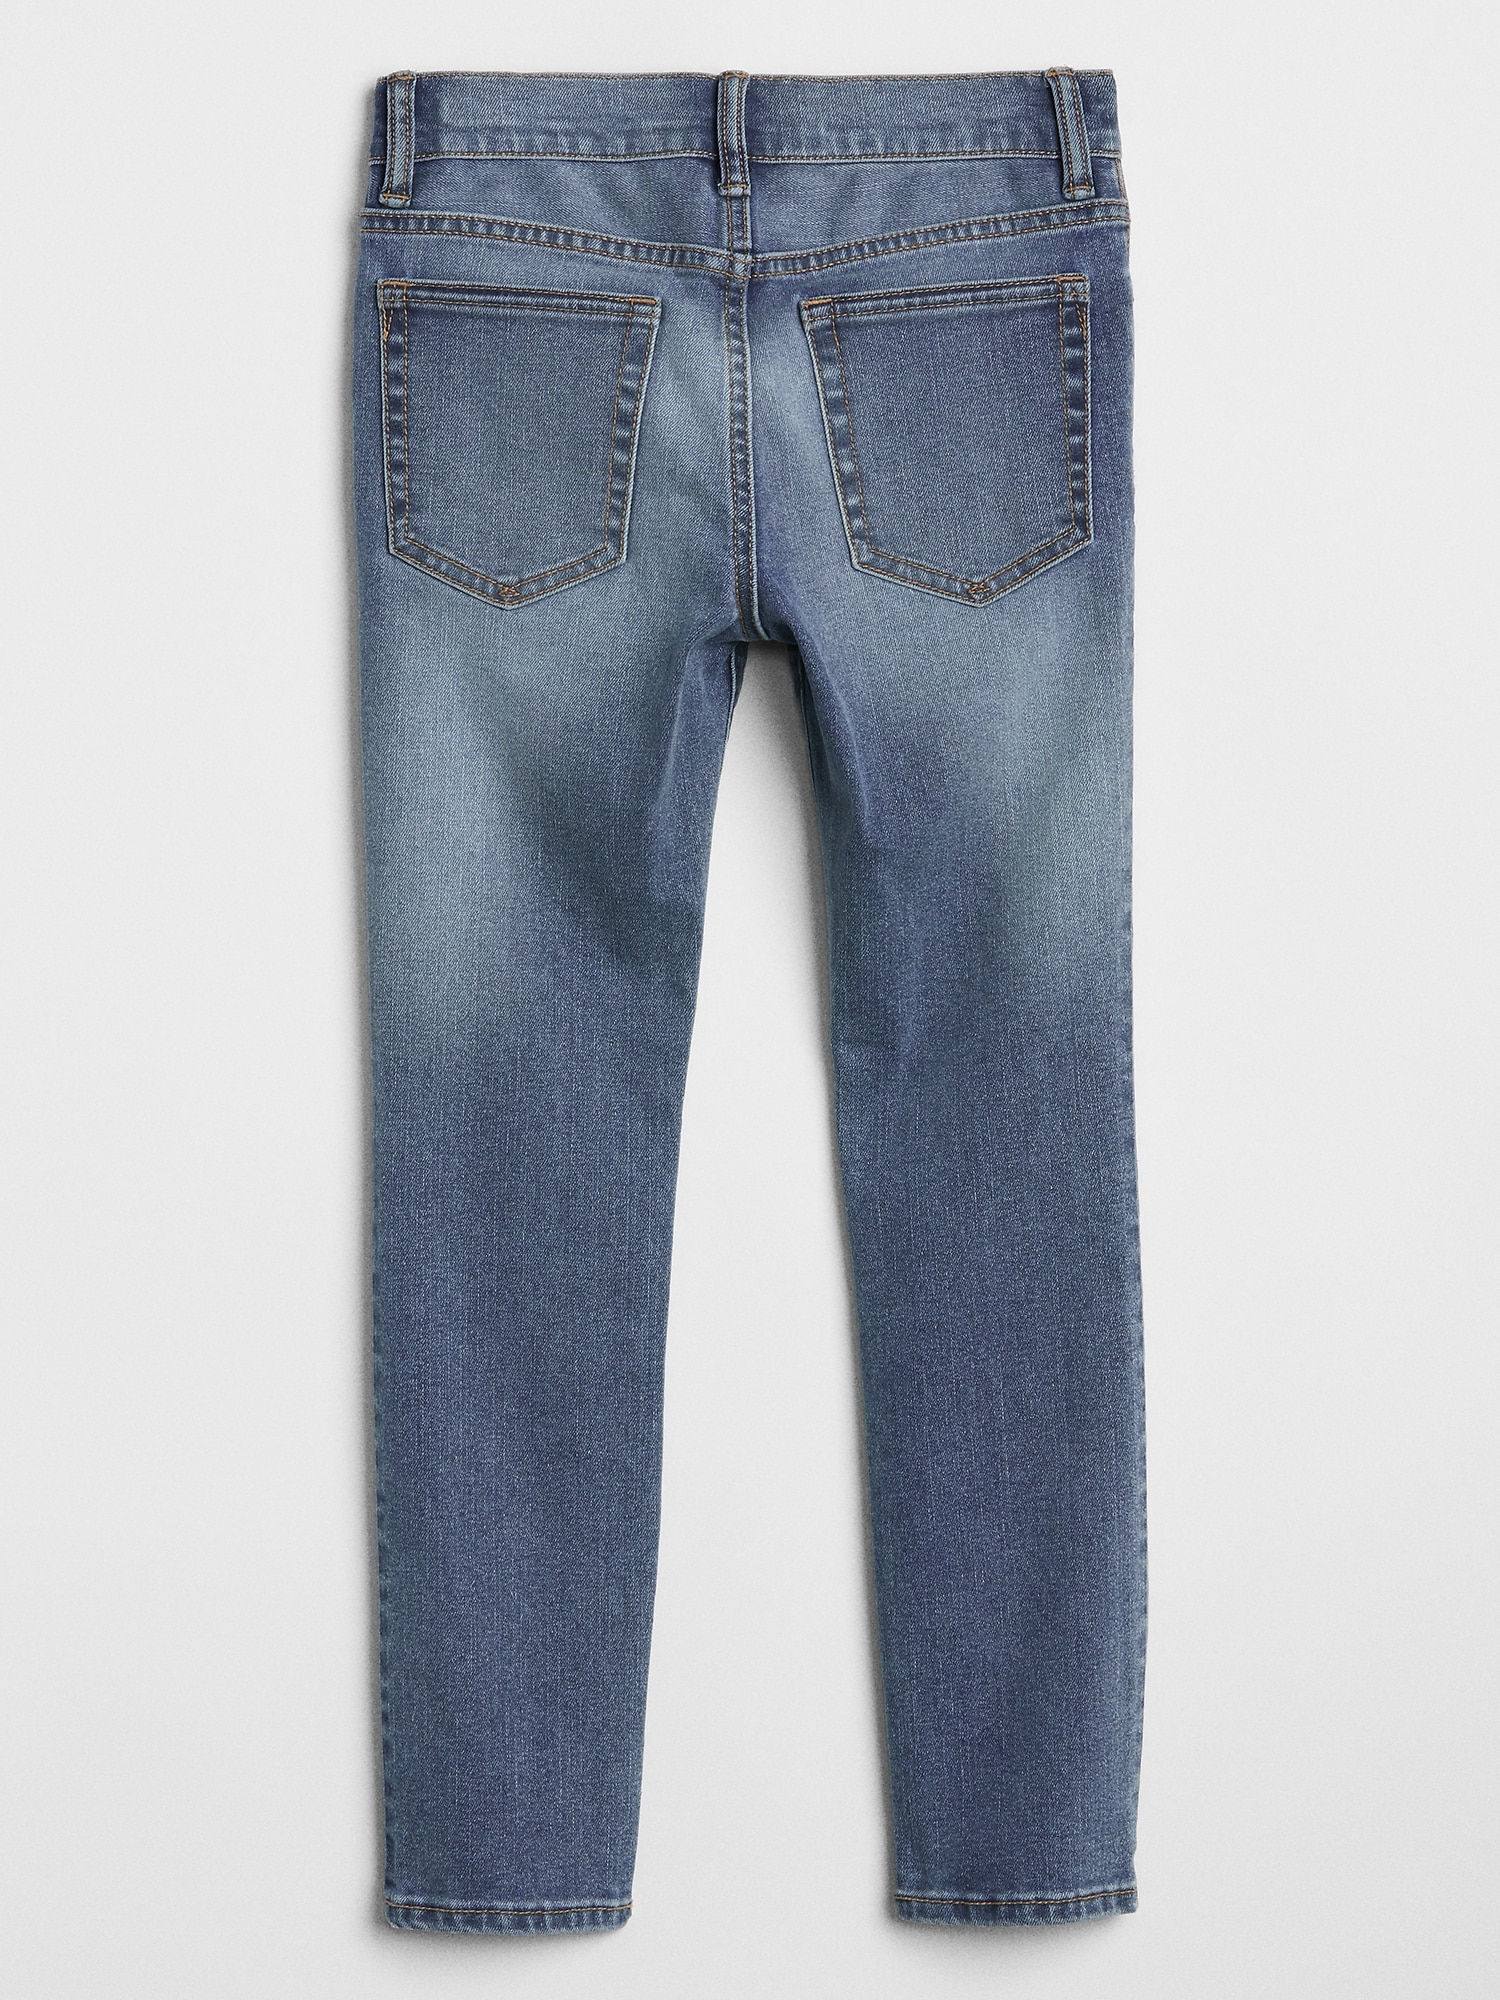 Kids Skinny Jeans with Washwell | Gap Factory